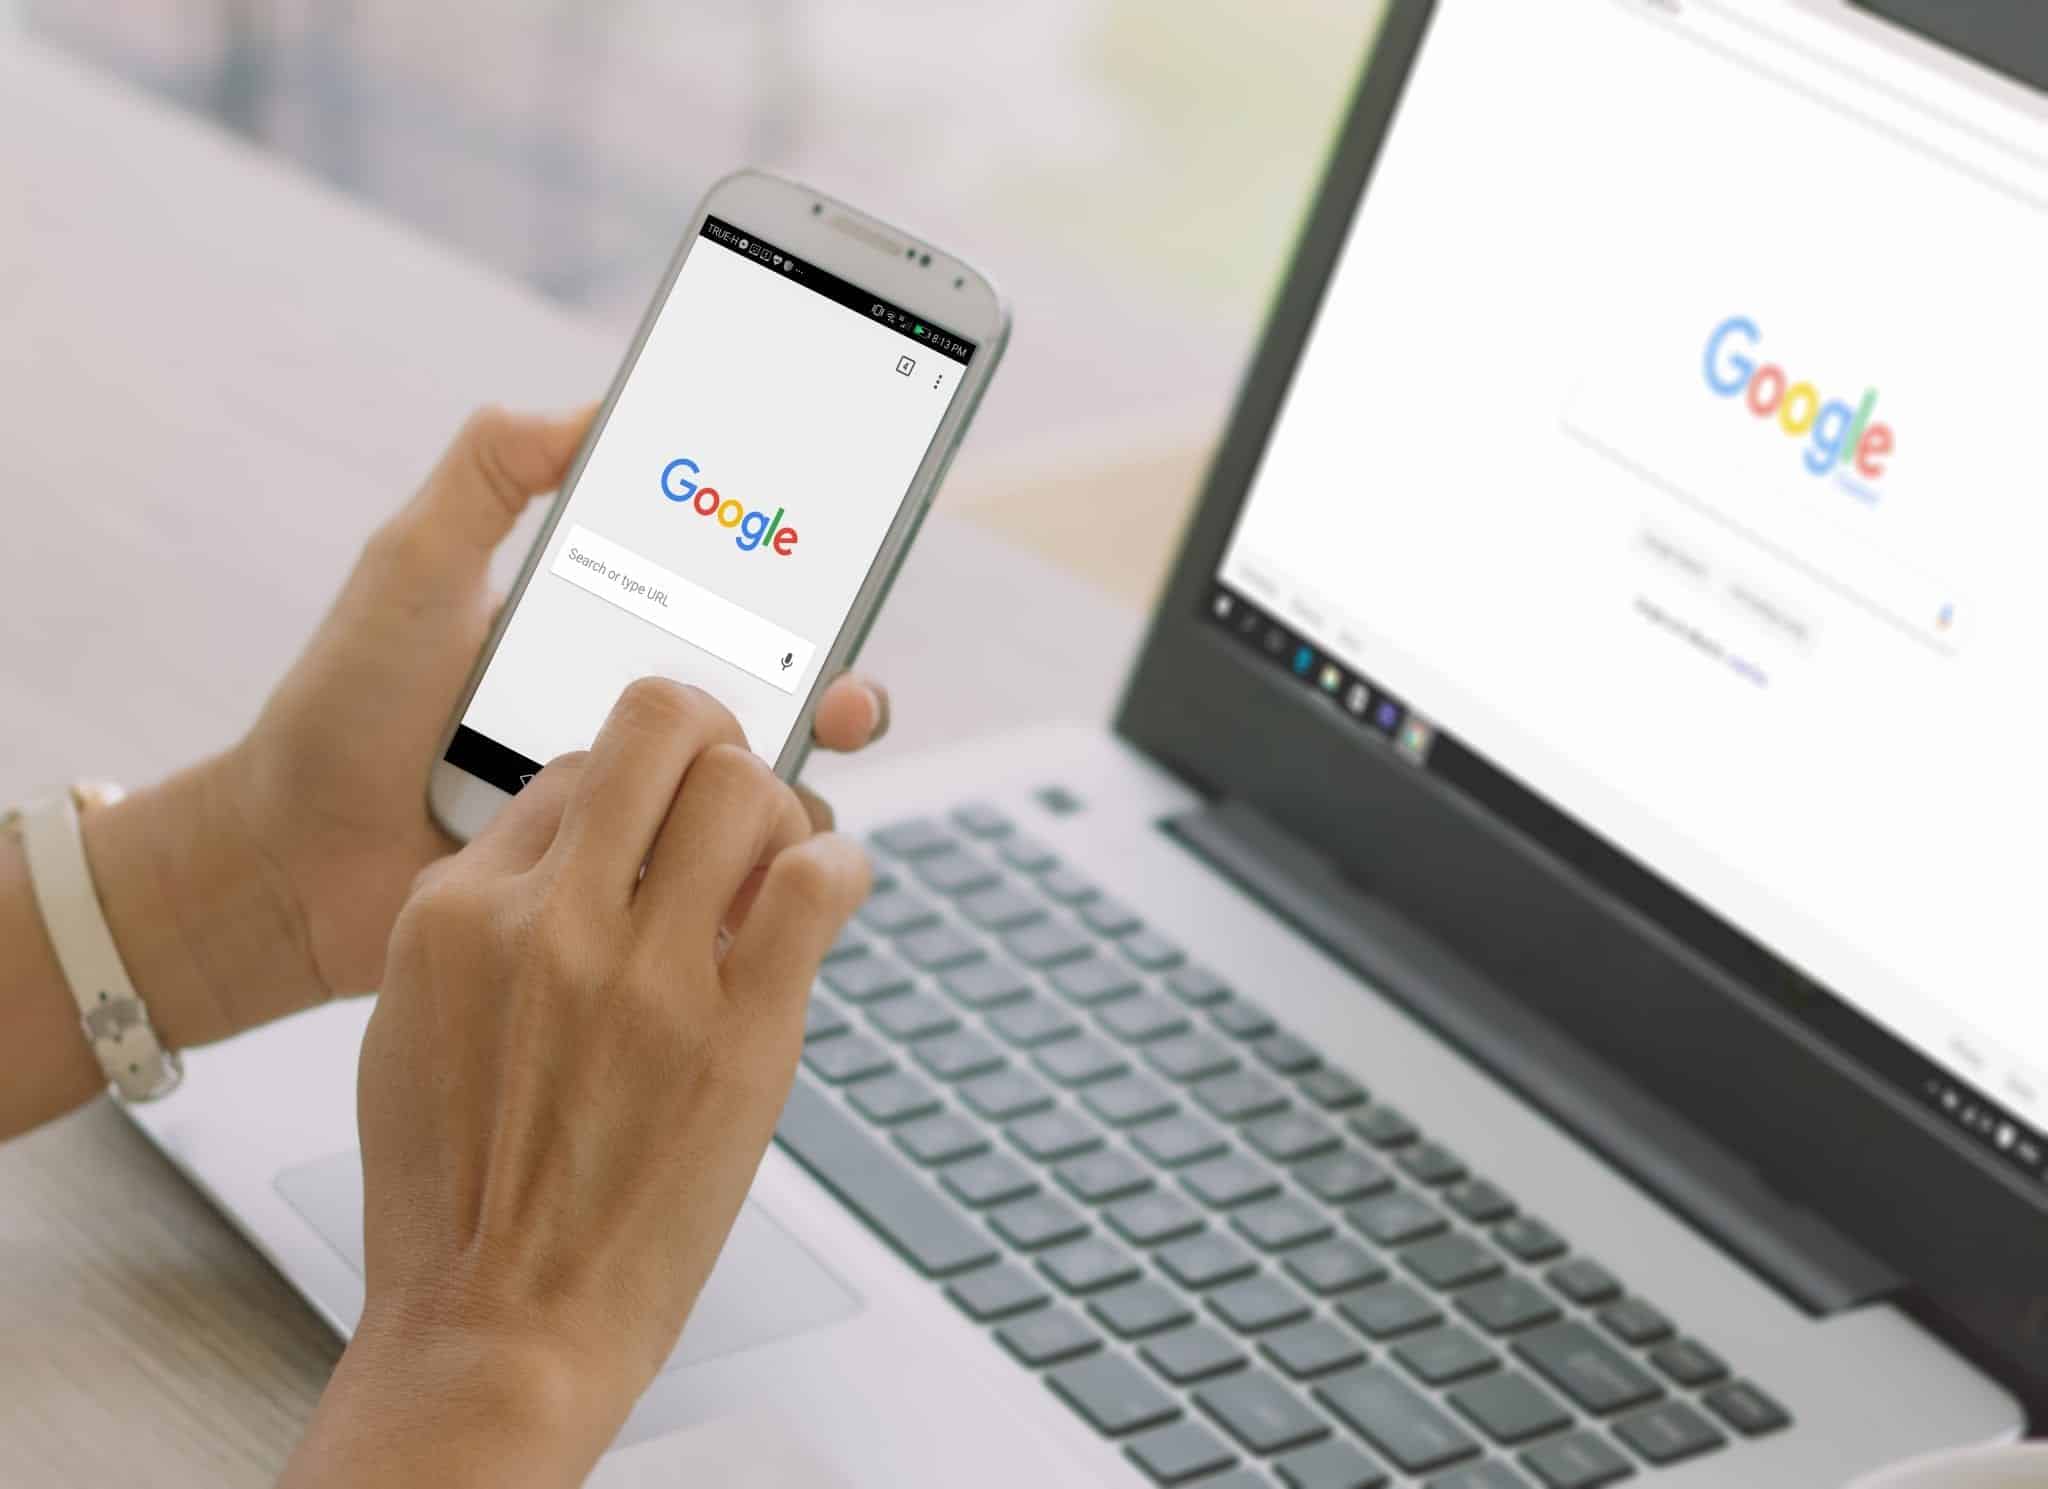 How to optimise your content to rank with featured snippets in Google, according to local SEO experts in Liverpool.